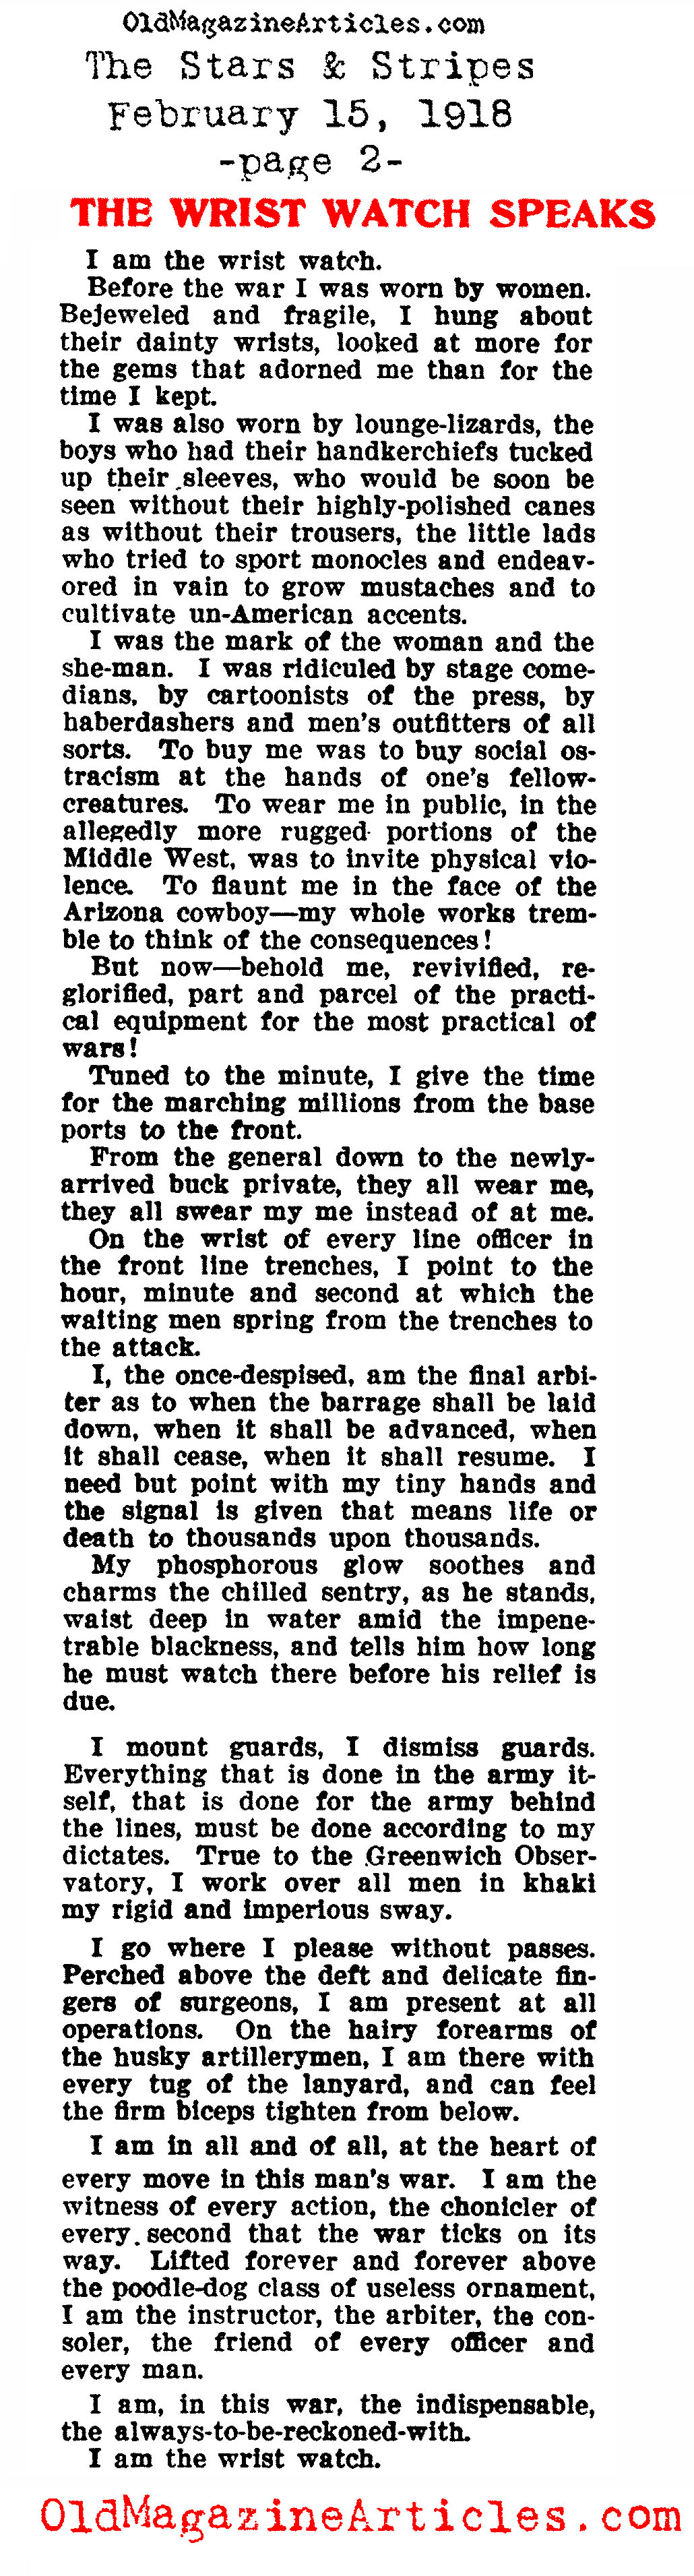 Tested in War: the Wrist Watch Becomes Fashionable  (The Stars and Stripes, 1918)